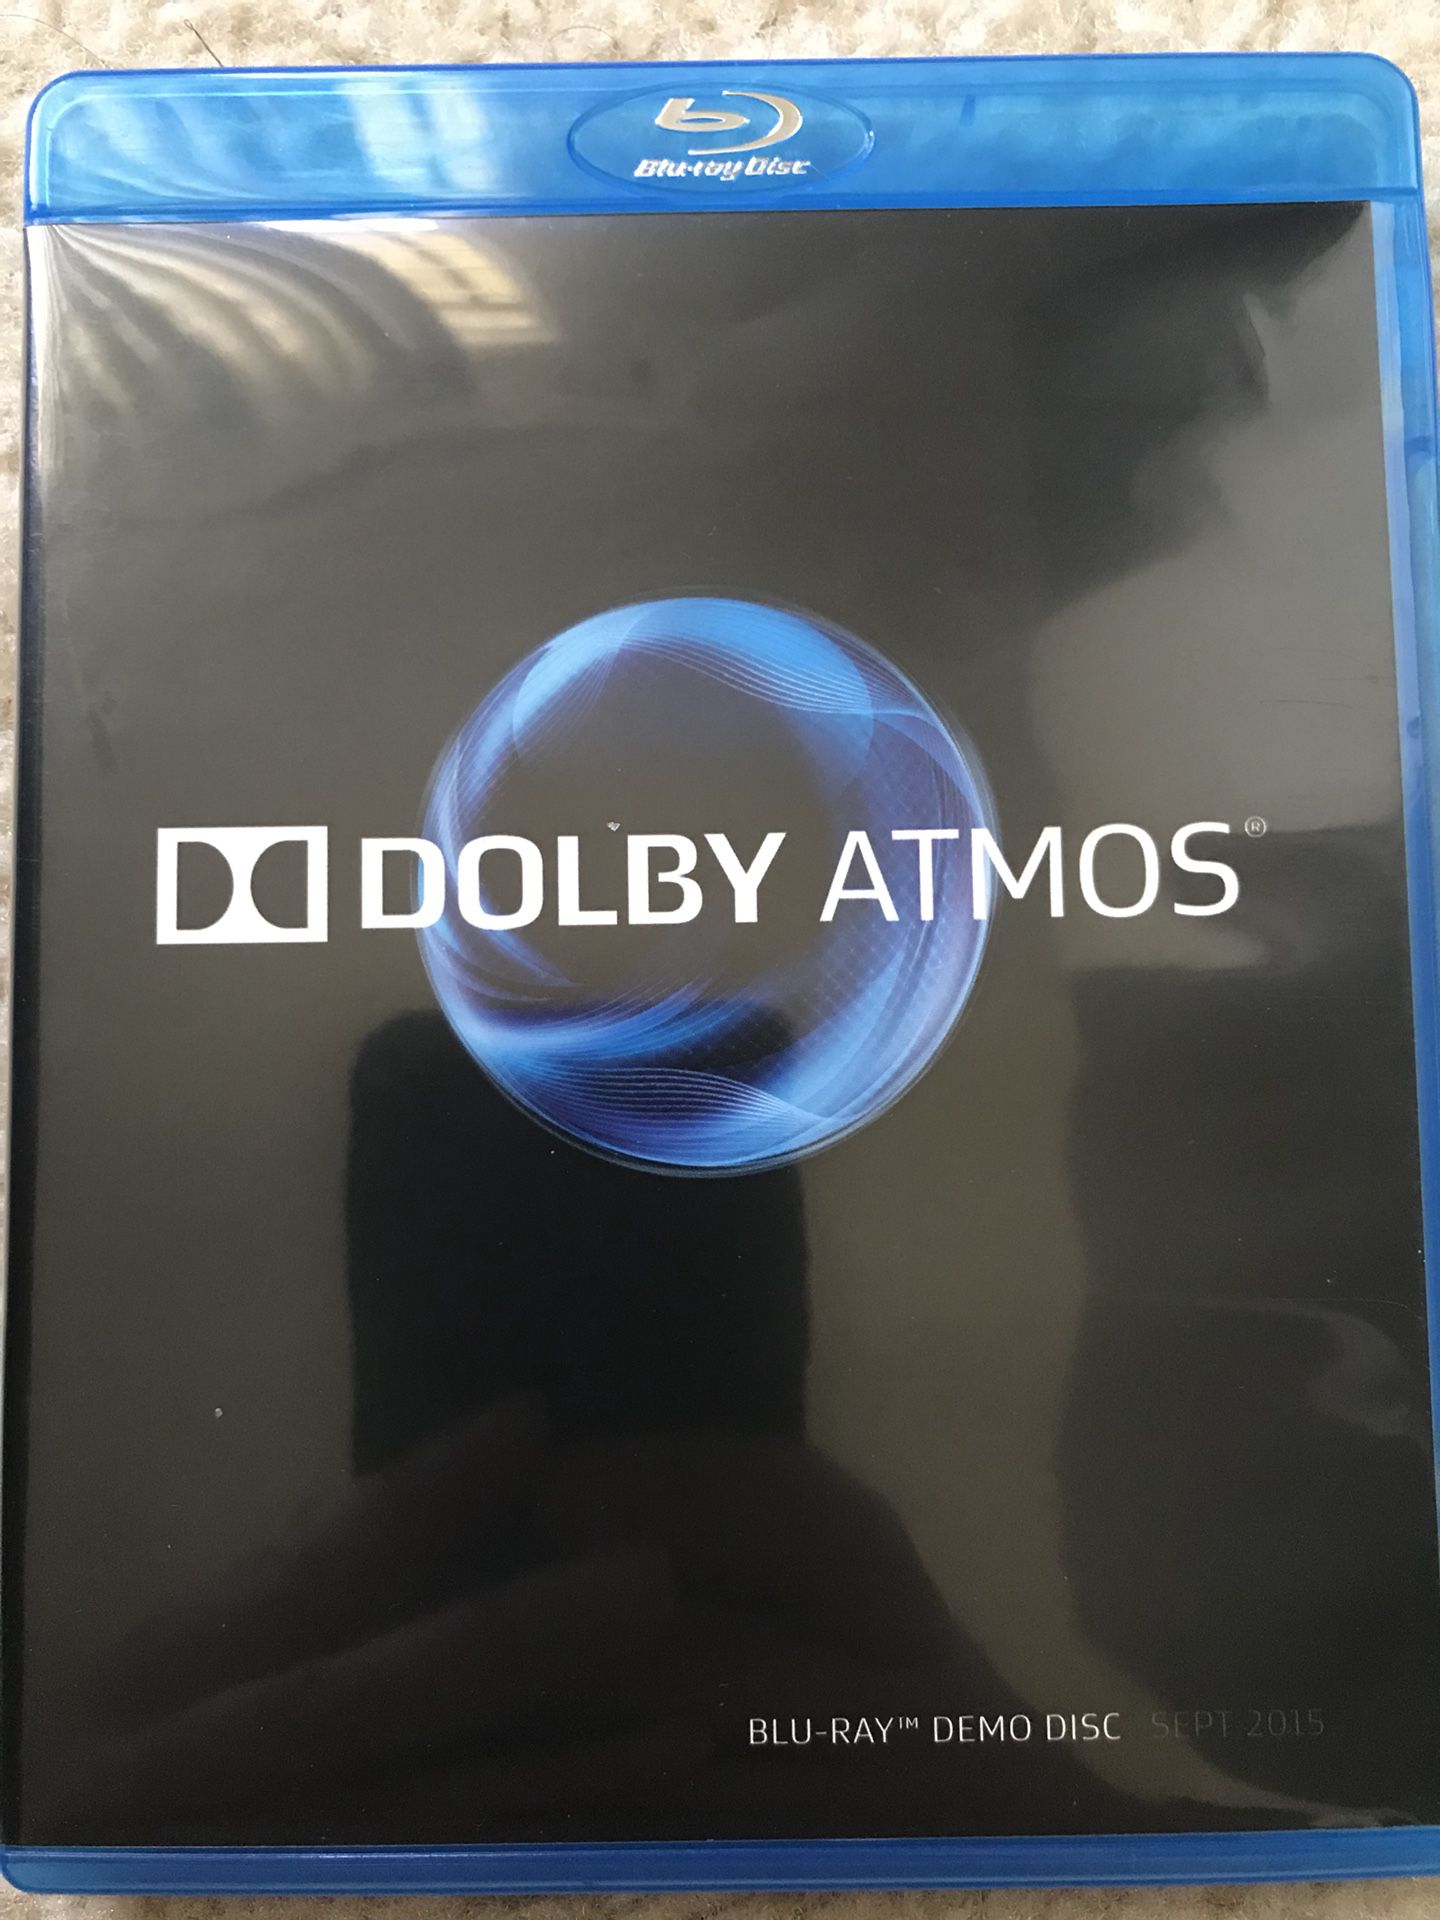 how can i buy a dolby atmos demo disc